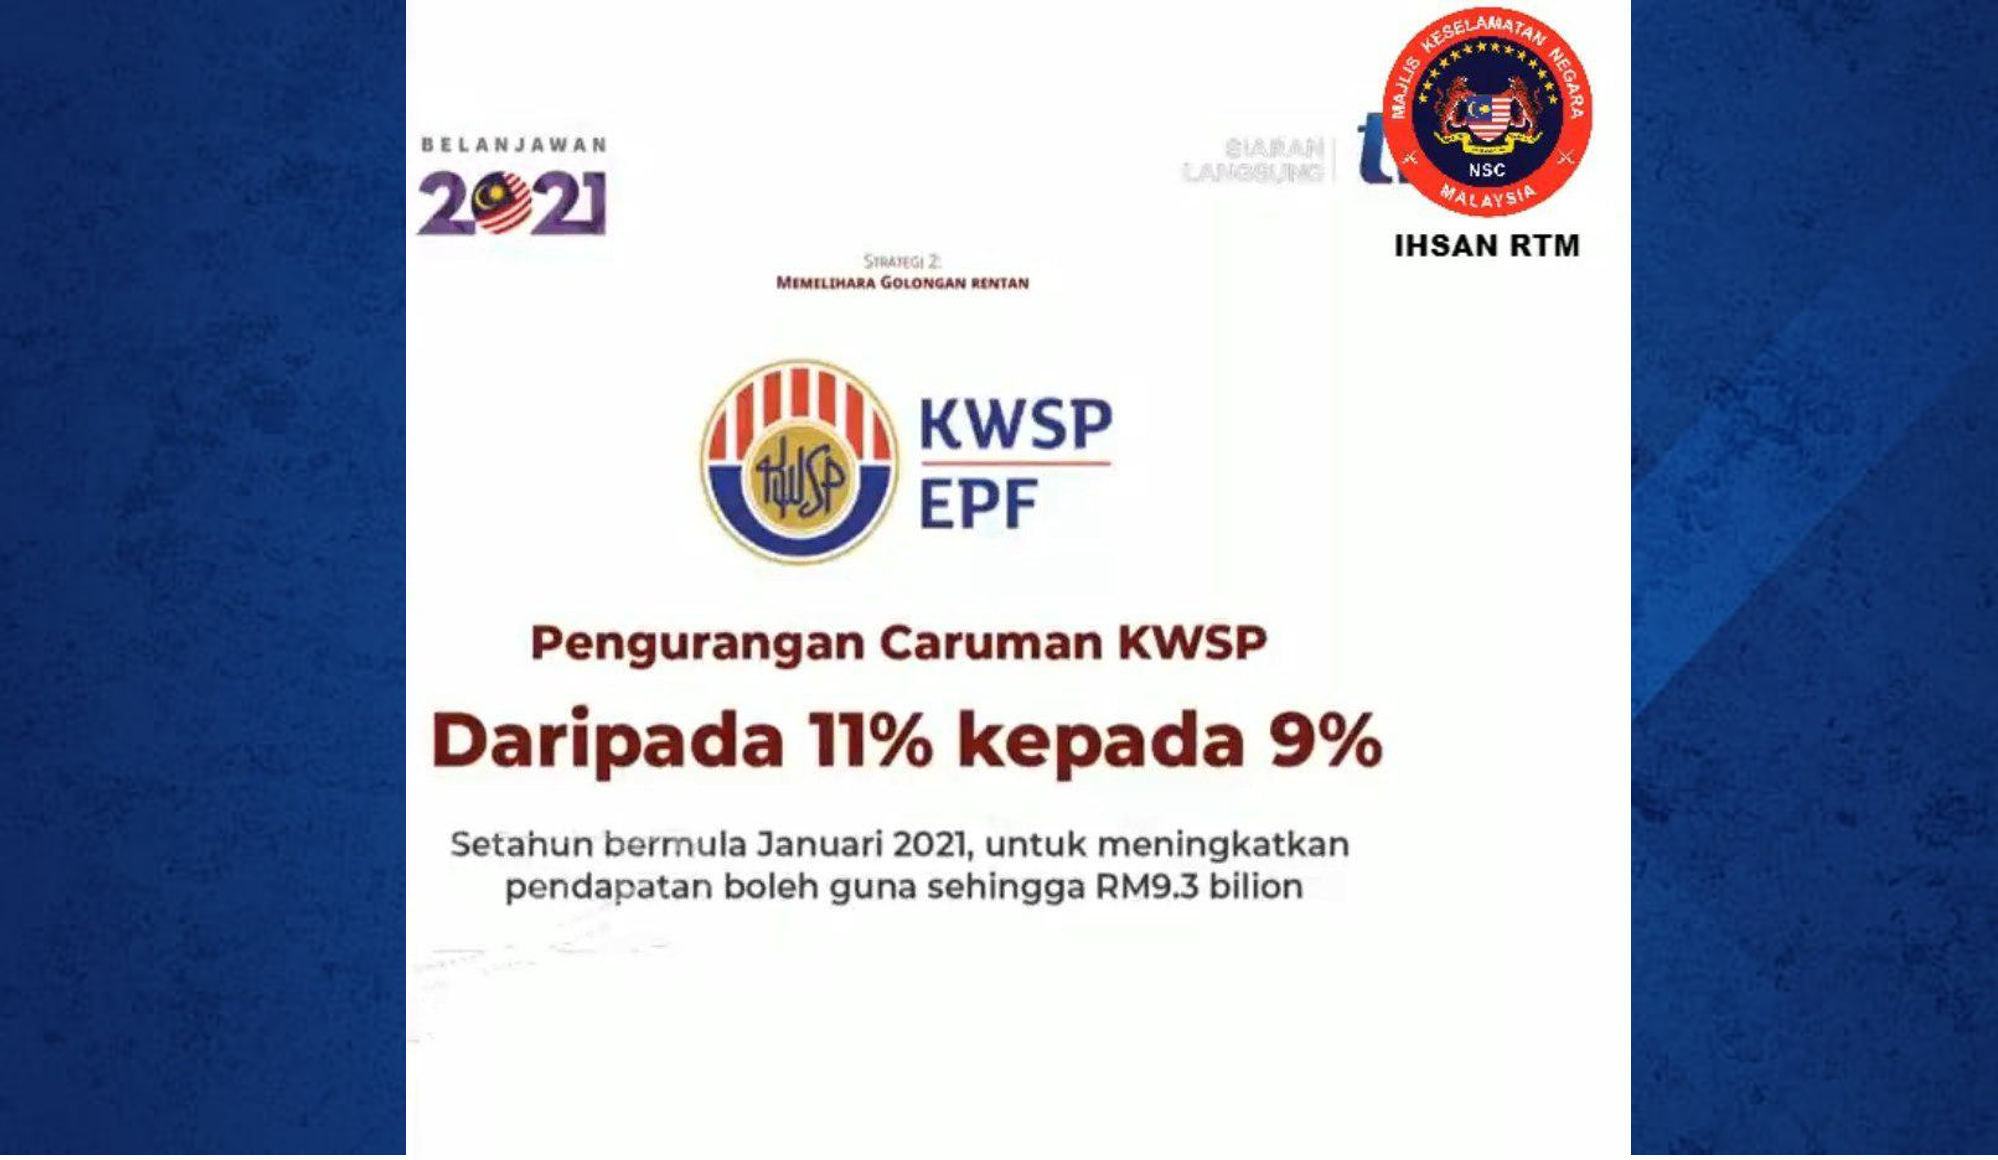 K A D A R C A R U M A N B U L A N A N K W S P 2 0 2 1 Zonealarm Results